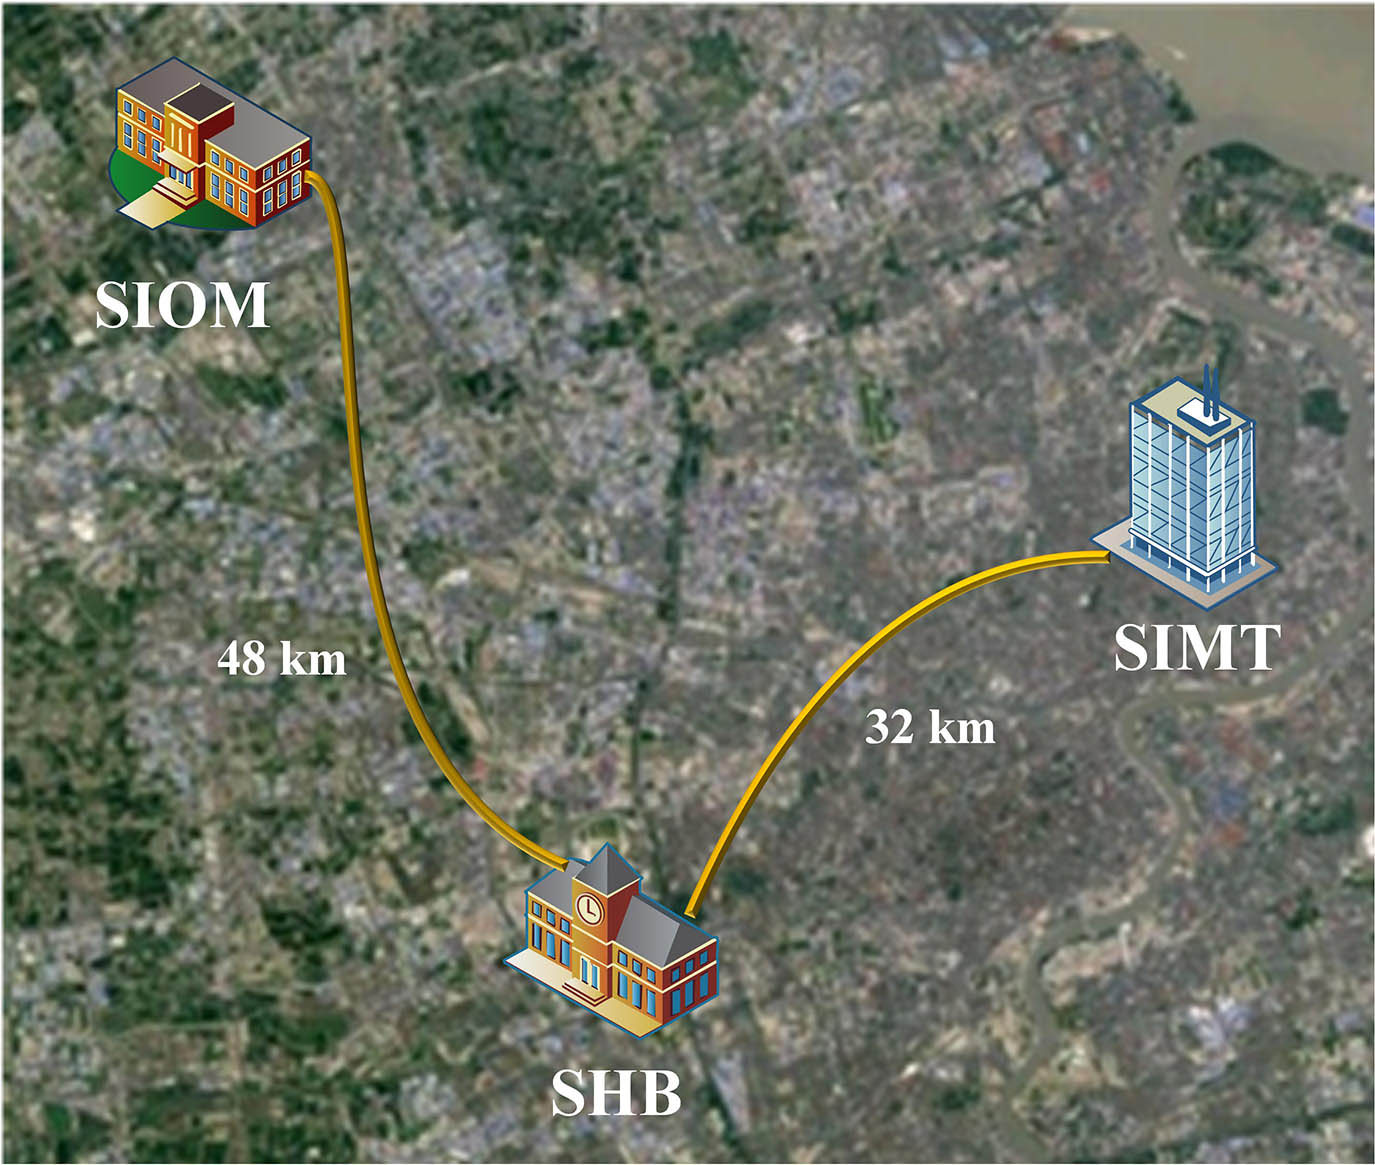 Schematic of the urban fiber link connecting the SIOM, the SHB, and the SIMT.